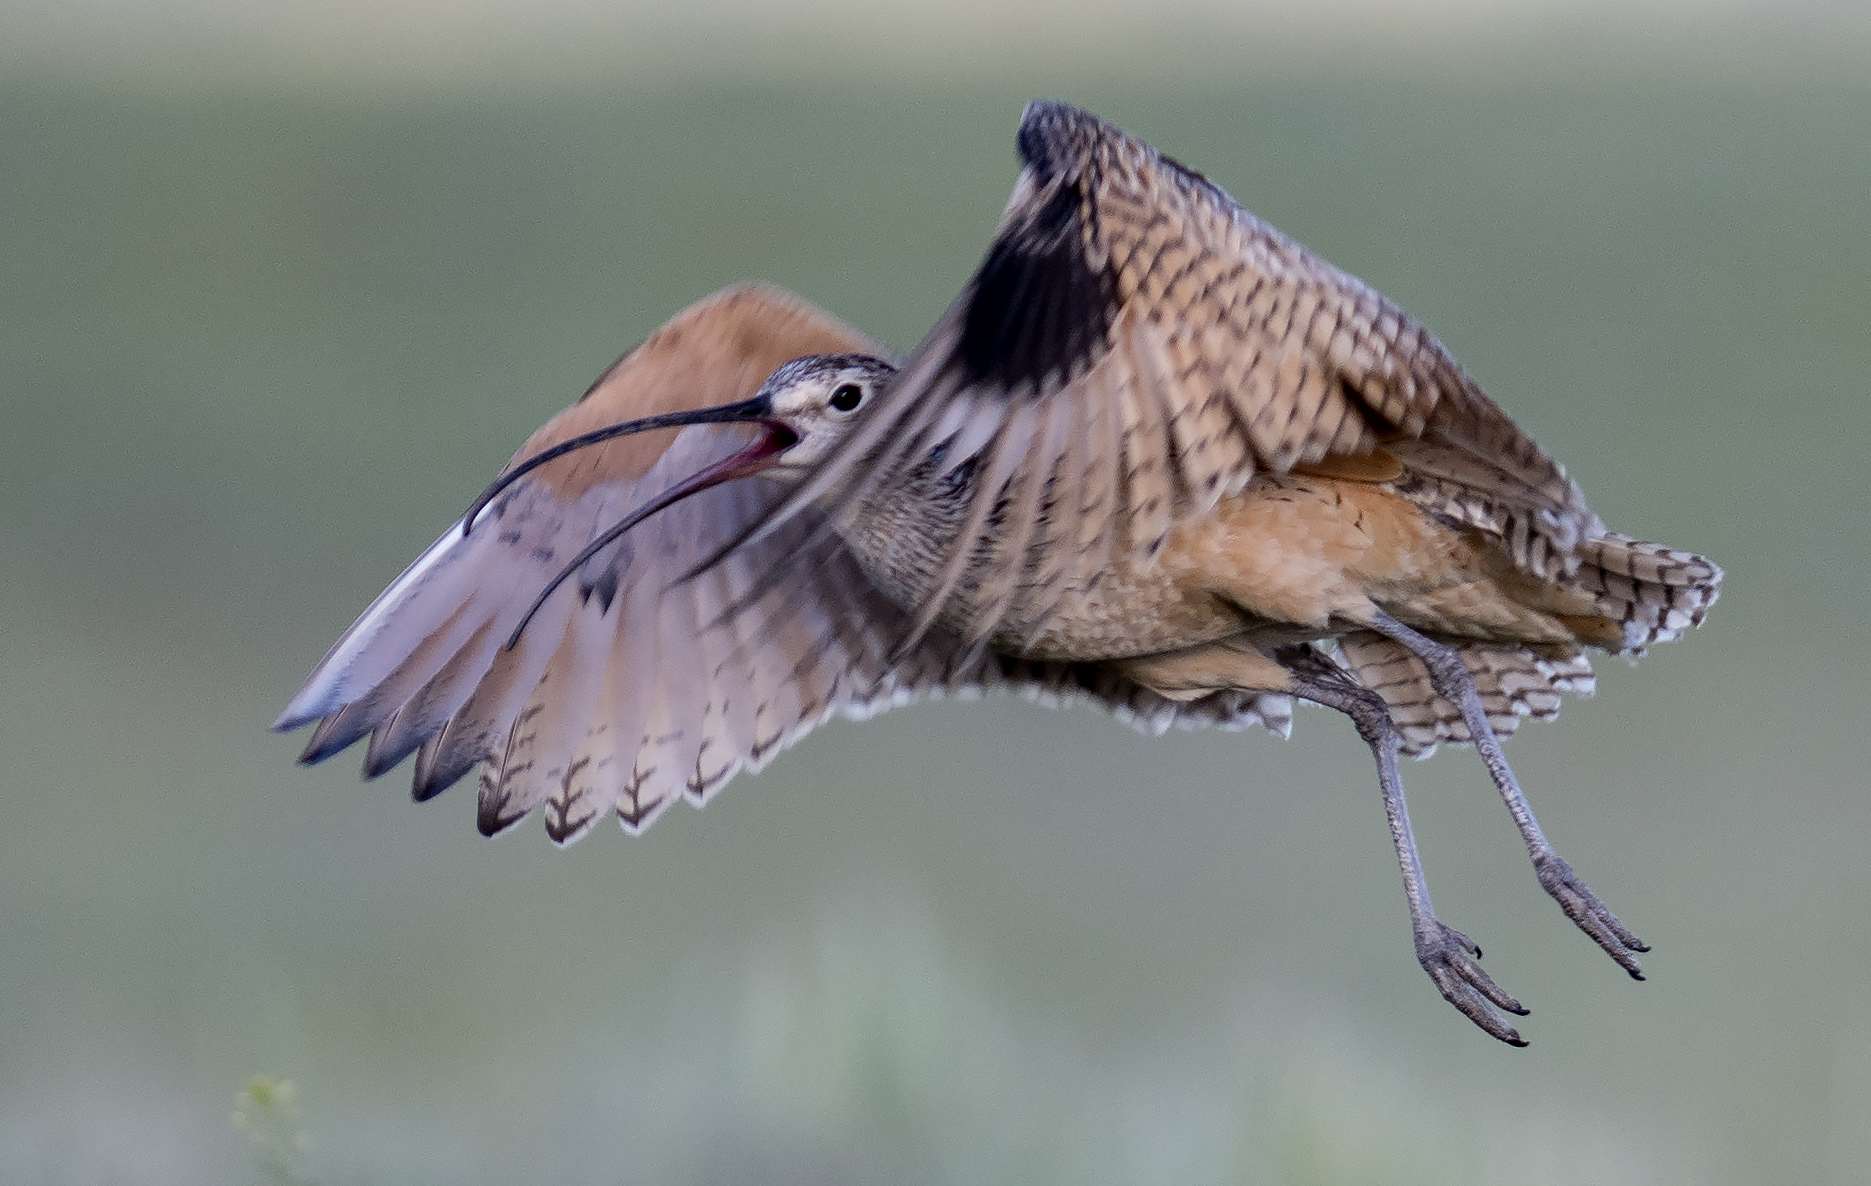 a long billed curlew in flight with wings flapping (slightly blurred by the fast motion of its flight)